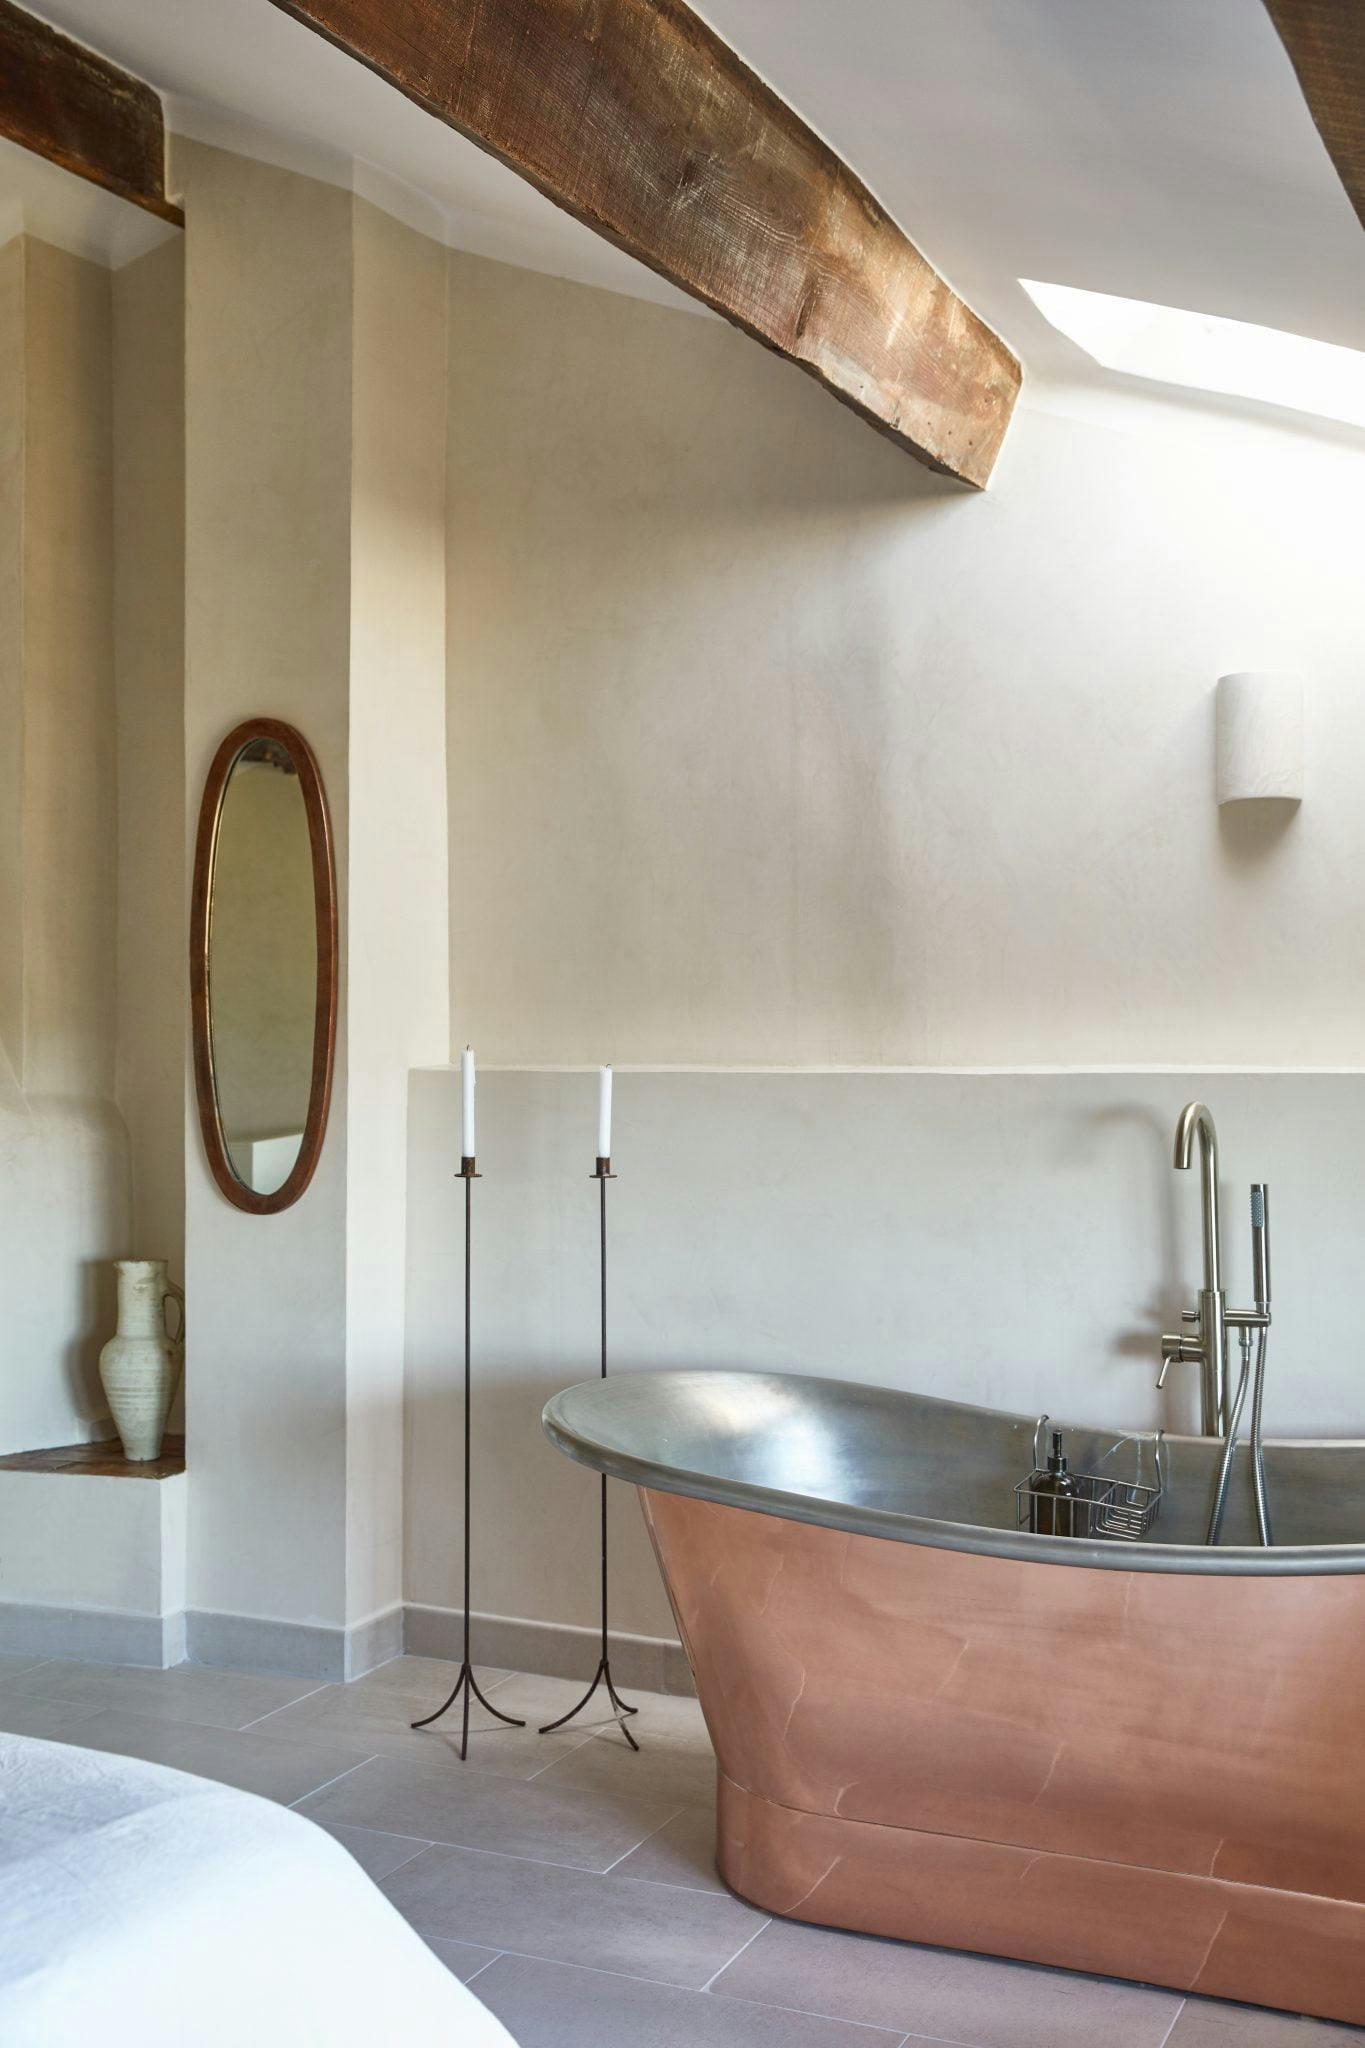 Copper bath and chandelier